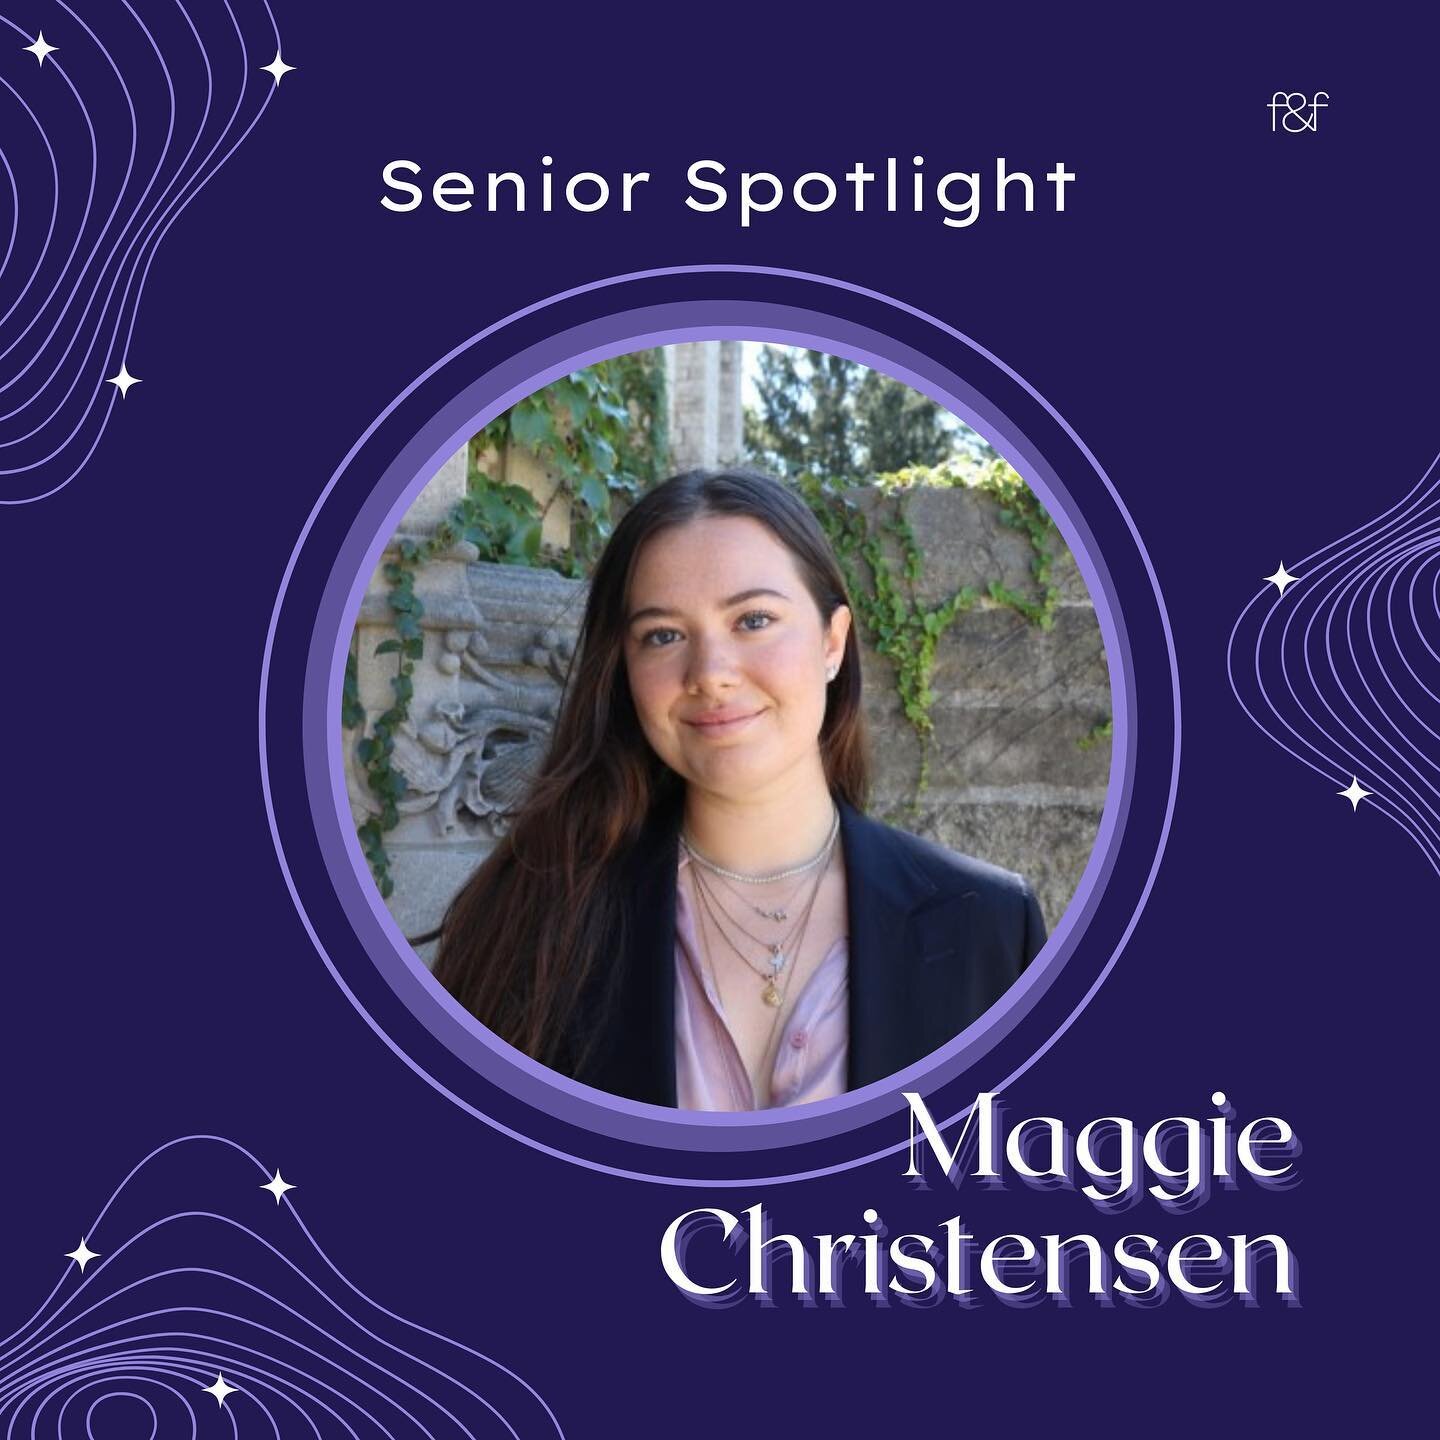 As we take some time to say goodbye to our f&amp;fantastic seniors, we want to highlight a few amazing account strategists throughout the quarter and celebrate their time with us!

First up is Maggie Christensen (she/her) who joined F&amp;F in Fall 2